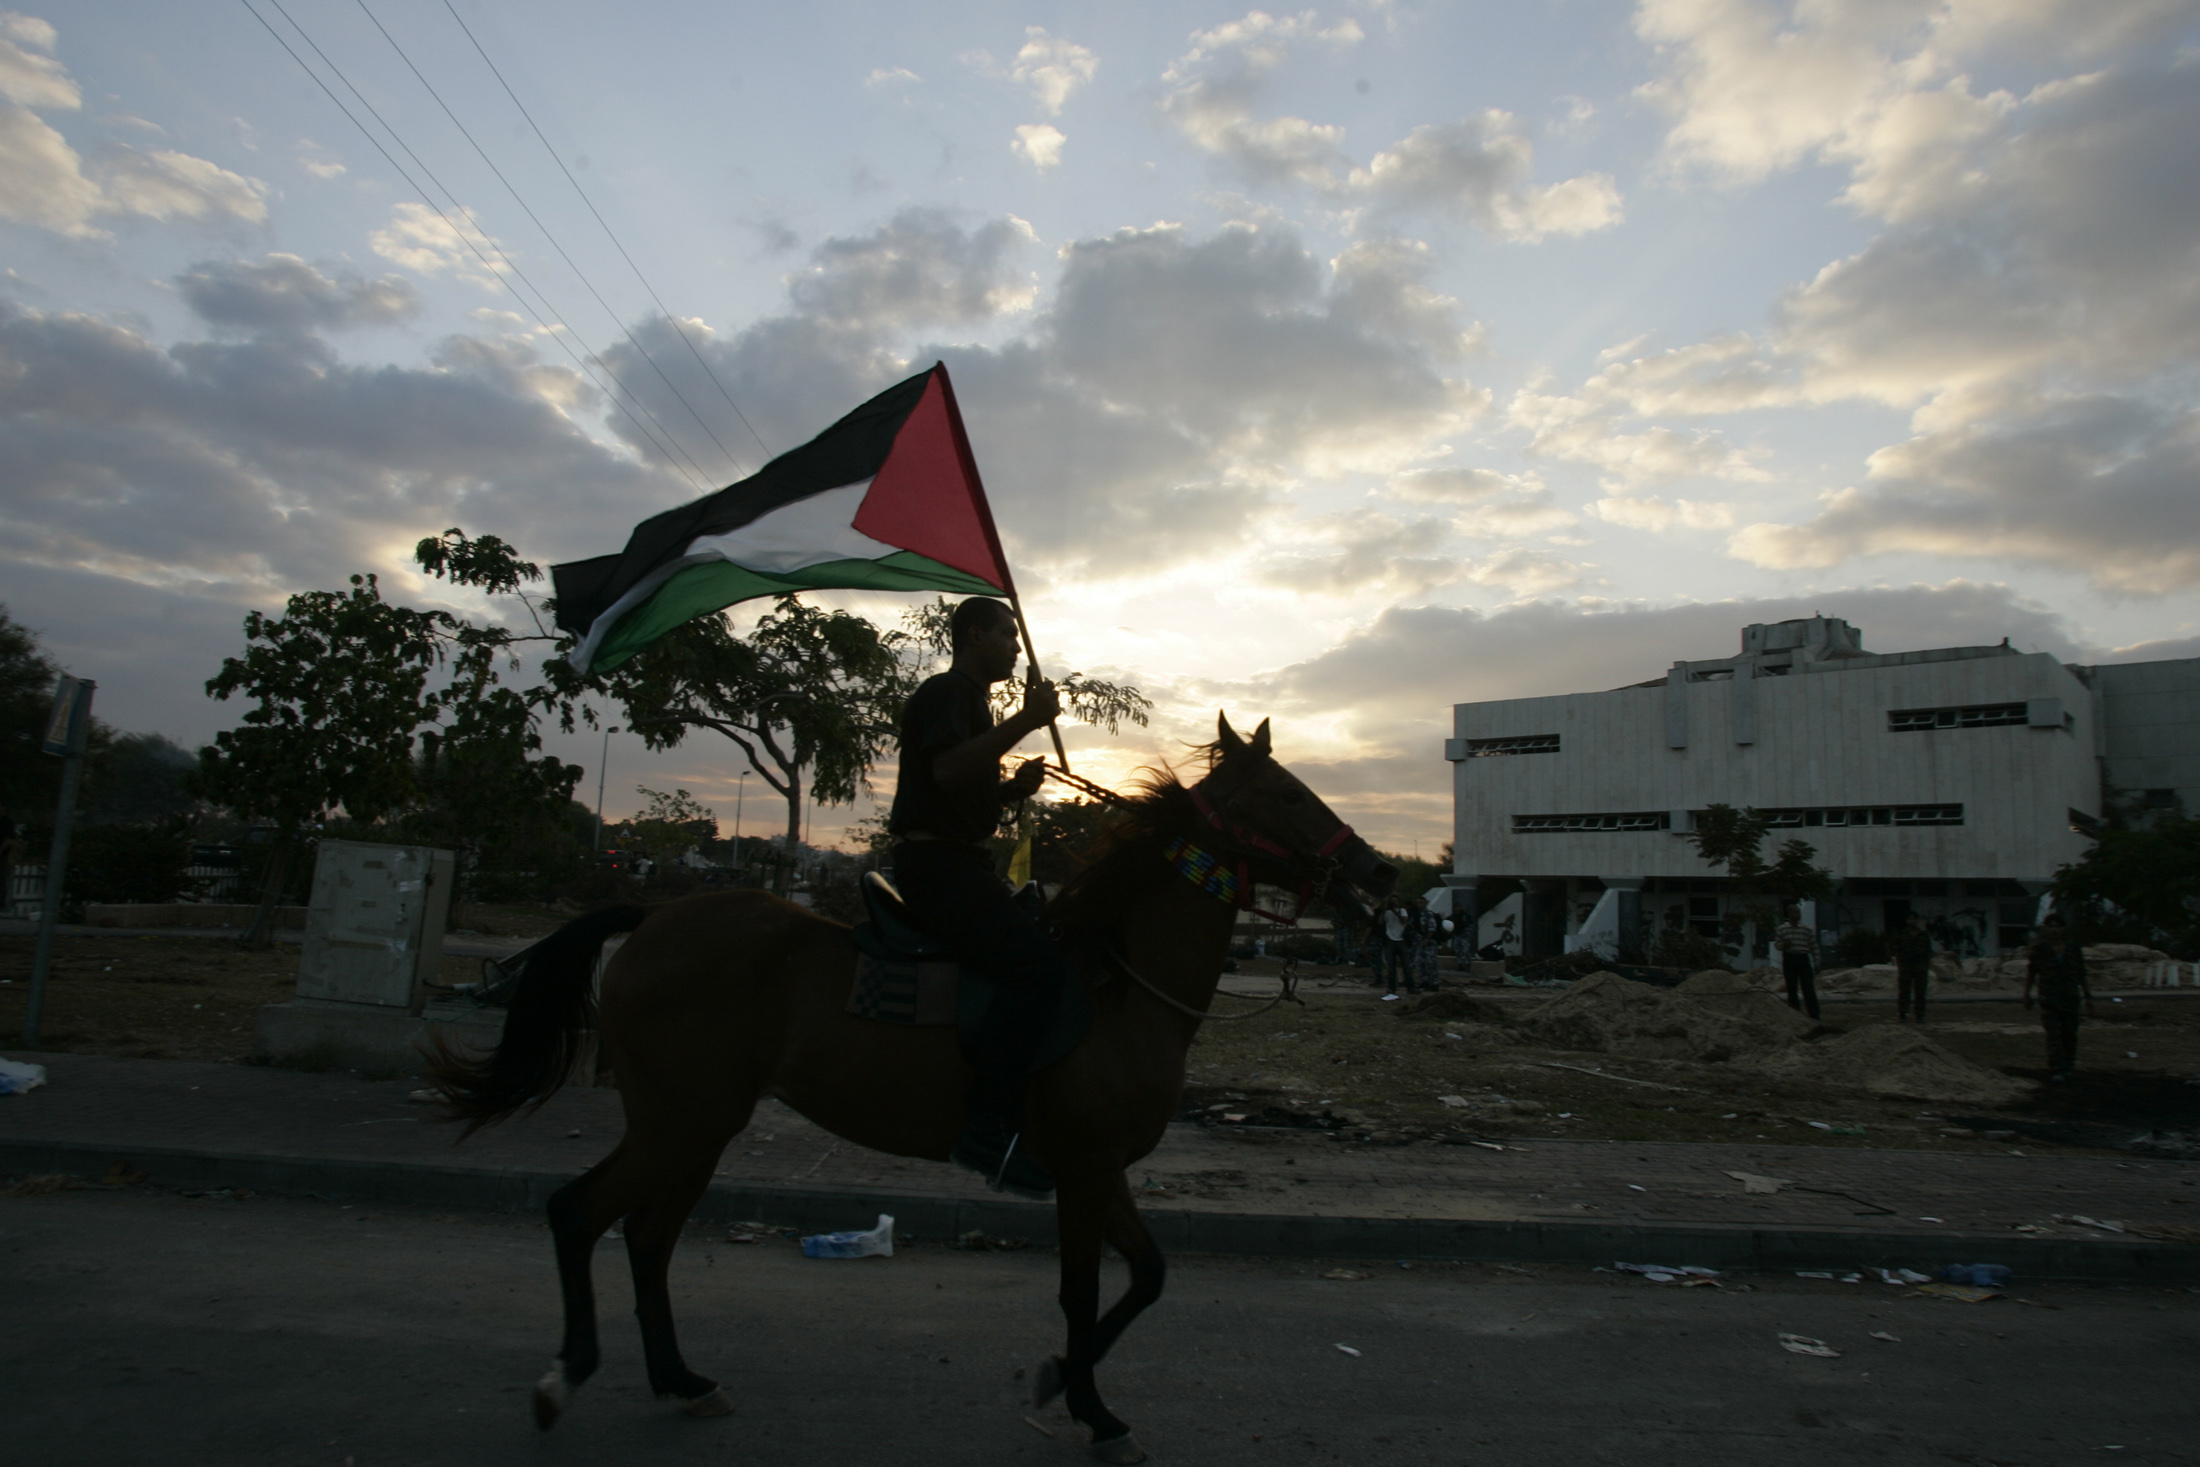 A Palestinian rides his horse while holding a Palestinian flag as he passes a synagogue in Neve Dekalim.